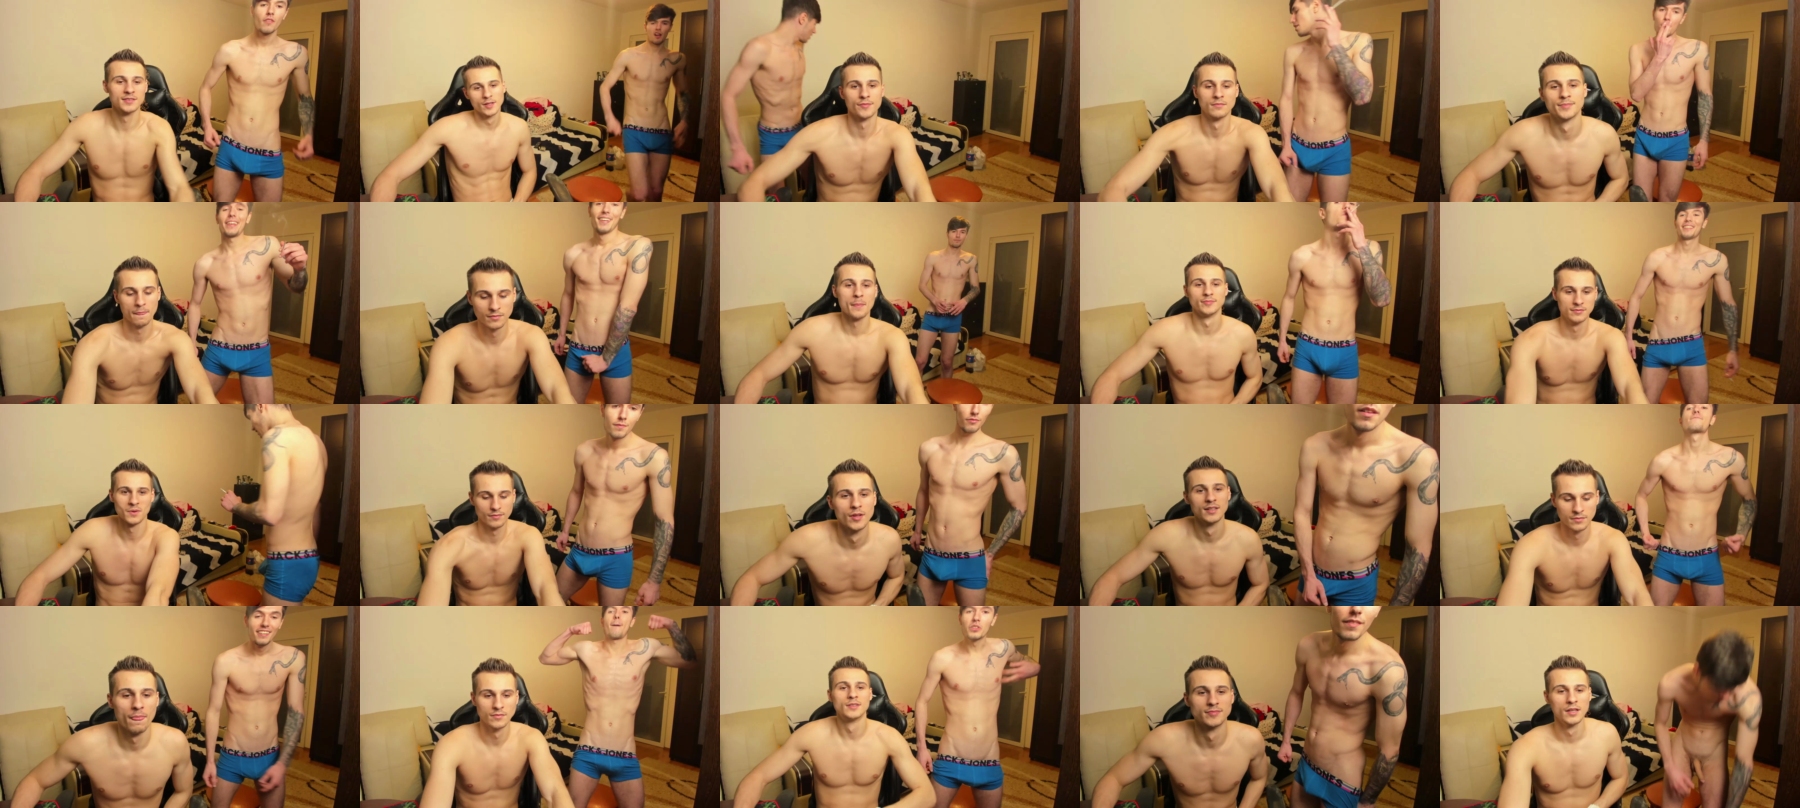 Awesome_Justin  16-11-2021 Male Wet